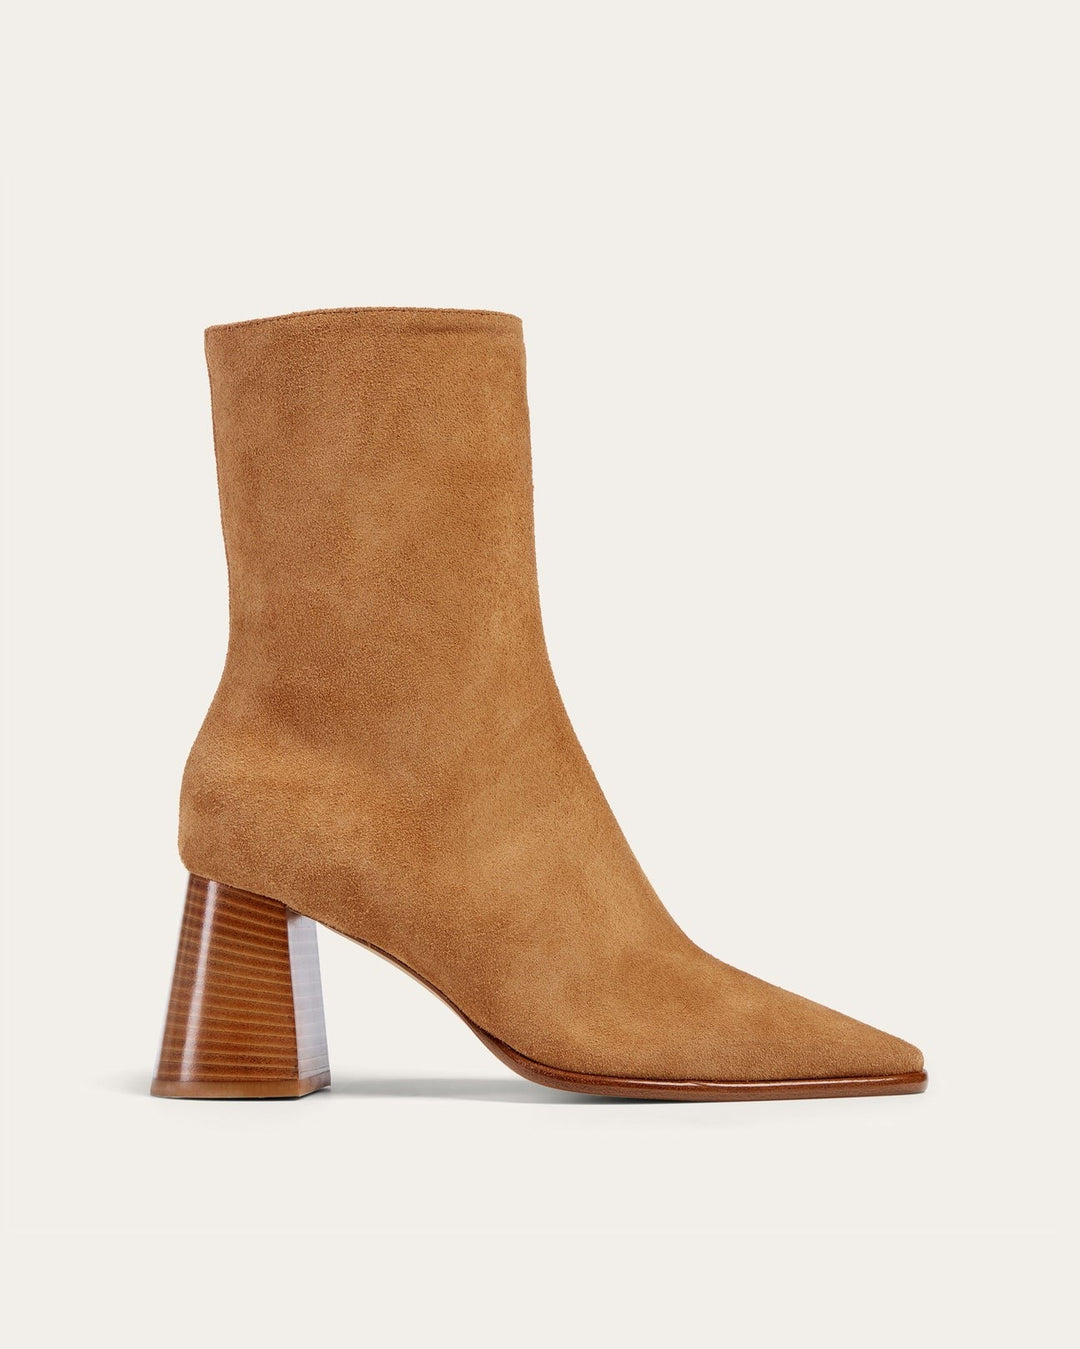 With its ultra-sleek profile, Hetti brings extra polish to your seasonal wardrobe rotation. Undoubtedly feminine, its zip-up silhouette expertly balances a flared mid-heel and pointed toe, crafted in our soft tan suede for instant elevation from morning until night.